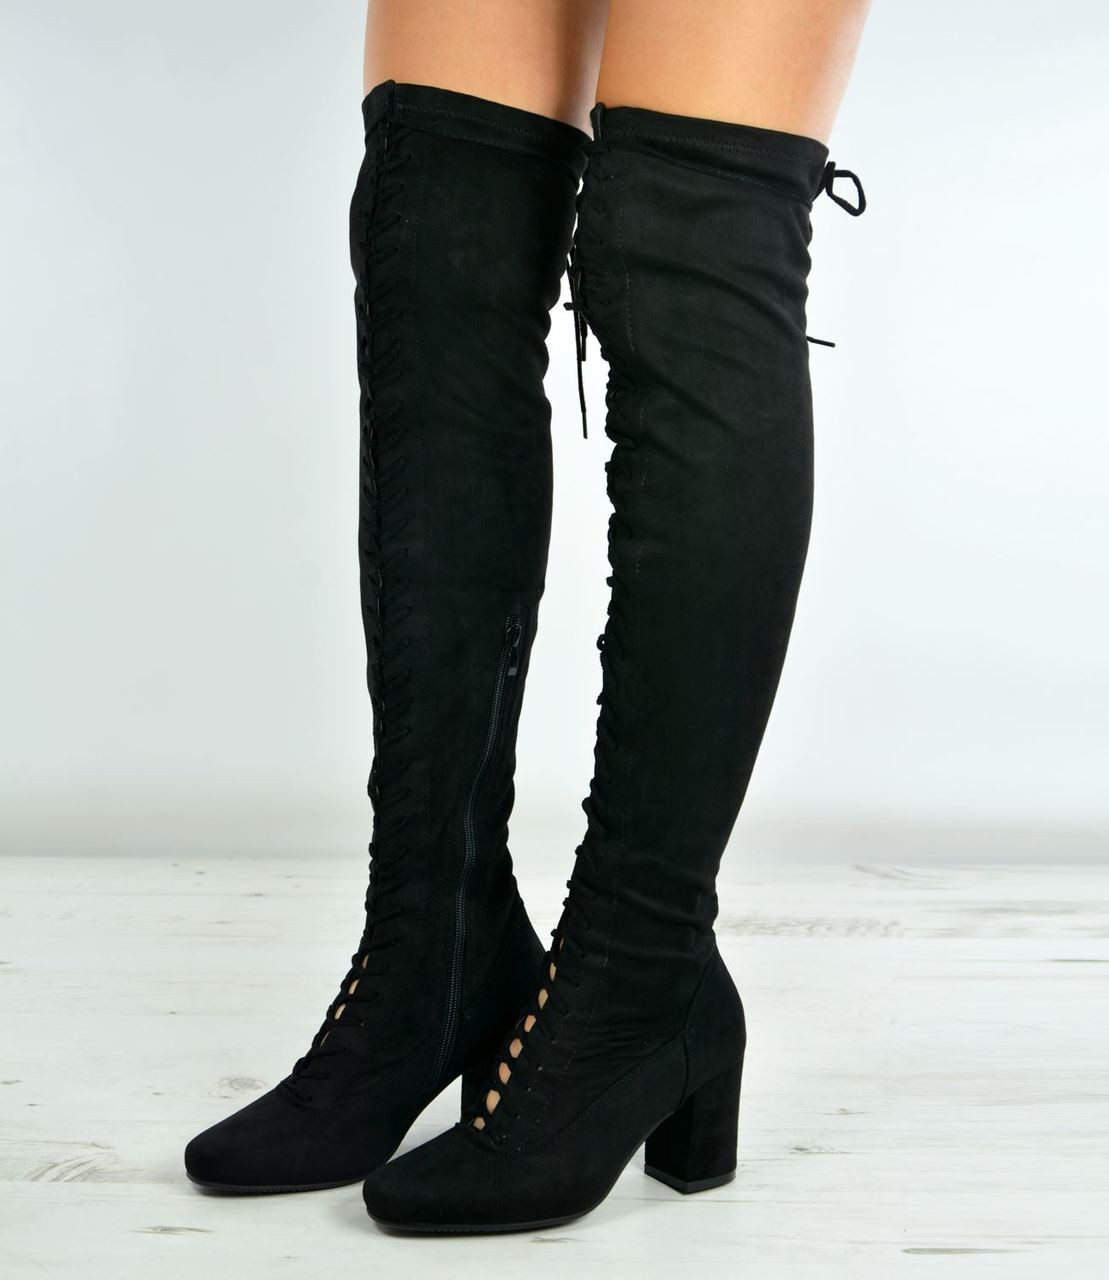 lace up over the knee boots uk